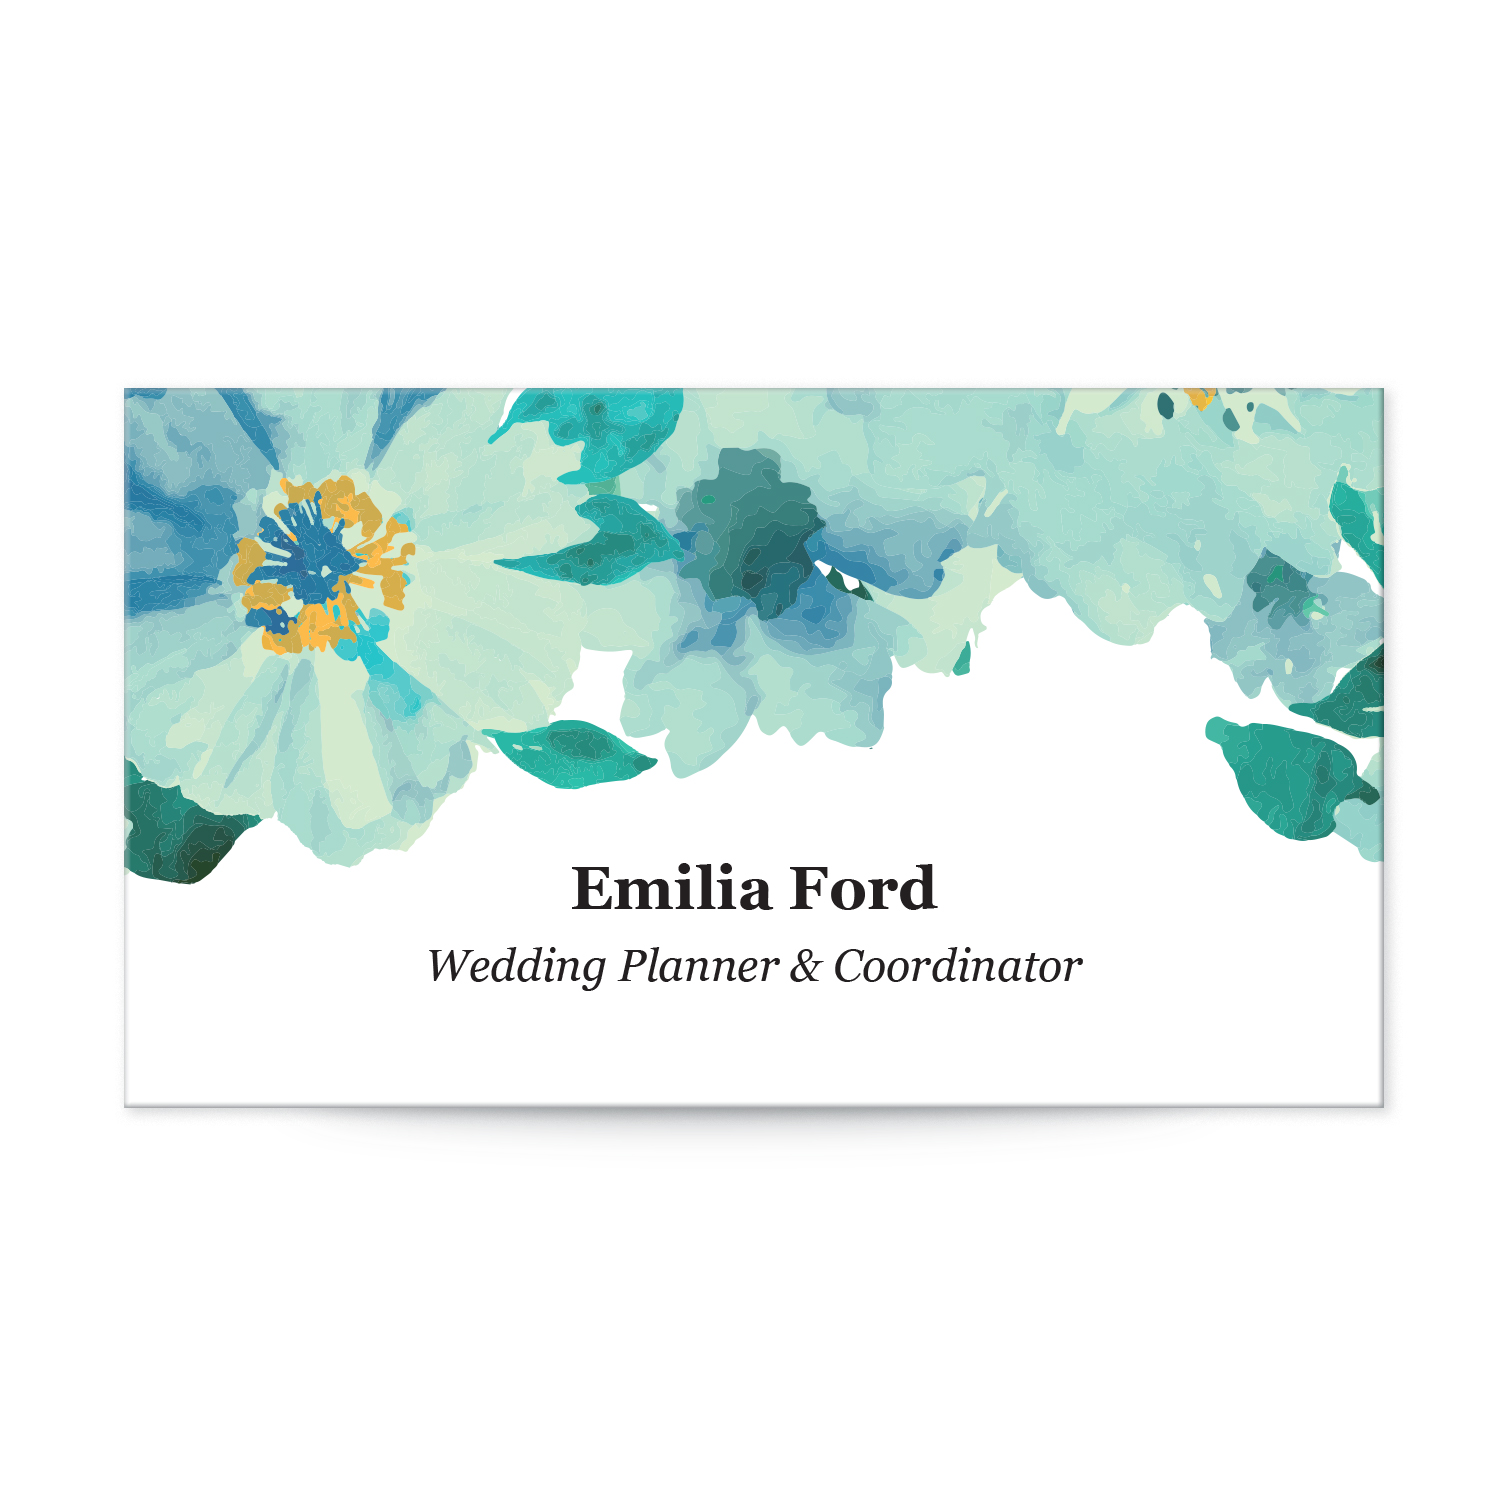 Business Cards Templates - Free Business Card Designs | Avery